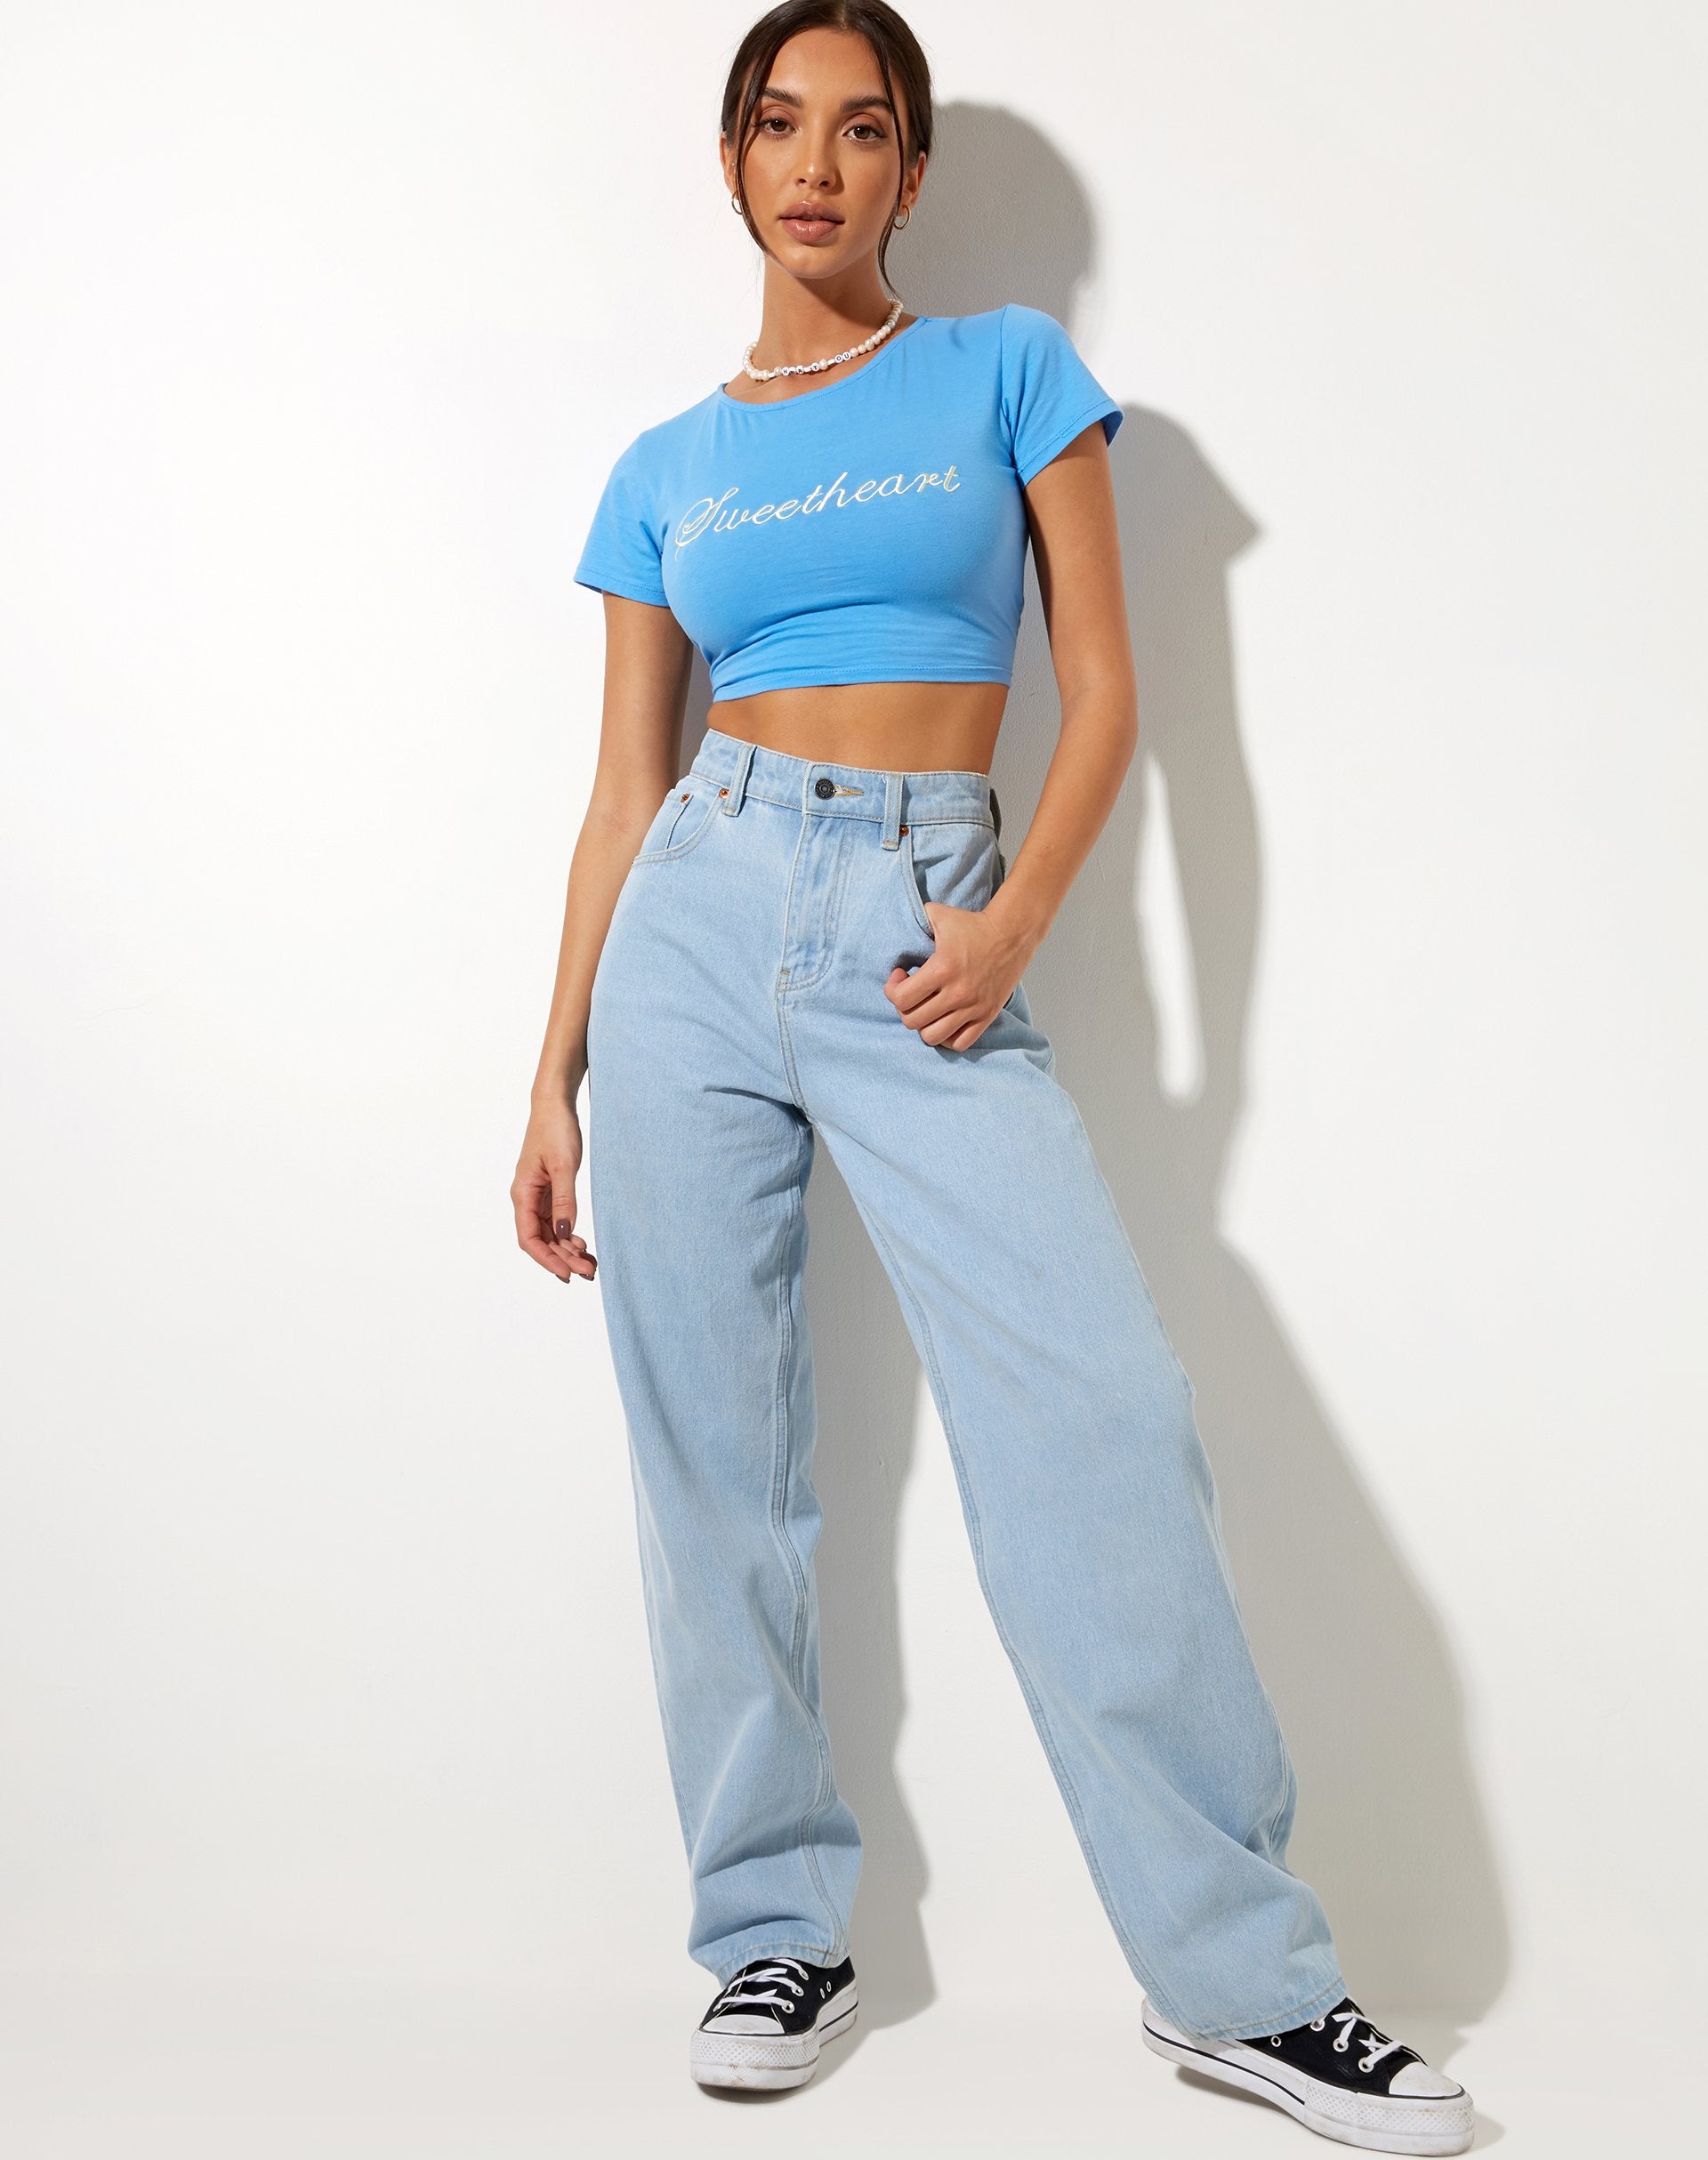 Image of Tindy Crop Top in Blue Sweetheart Embro